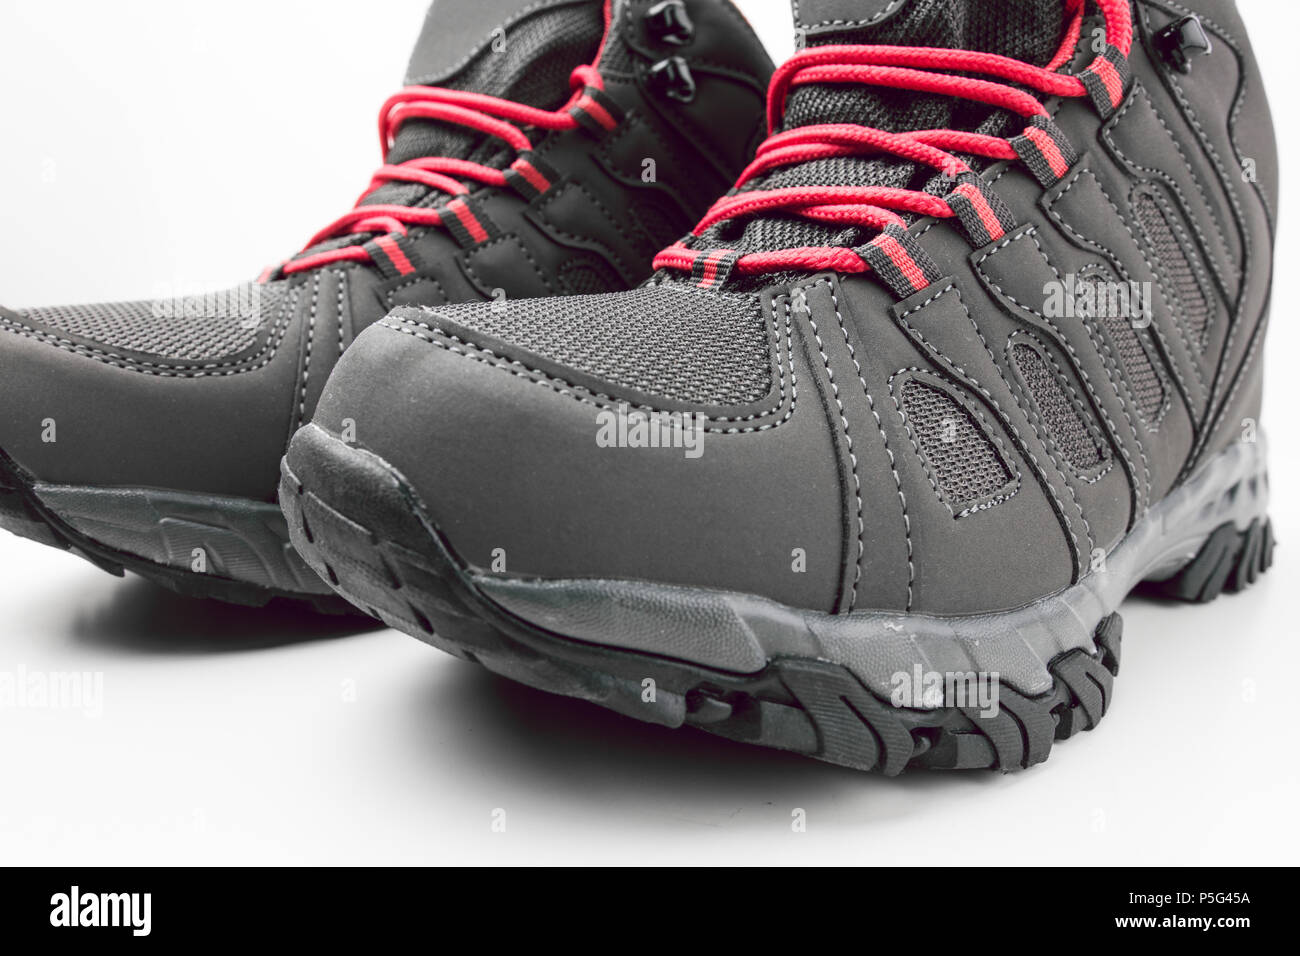 new-hiking-shoes-with-red-straps-on-white-background-hiking-running-lifestyle-P5G45A.jpg